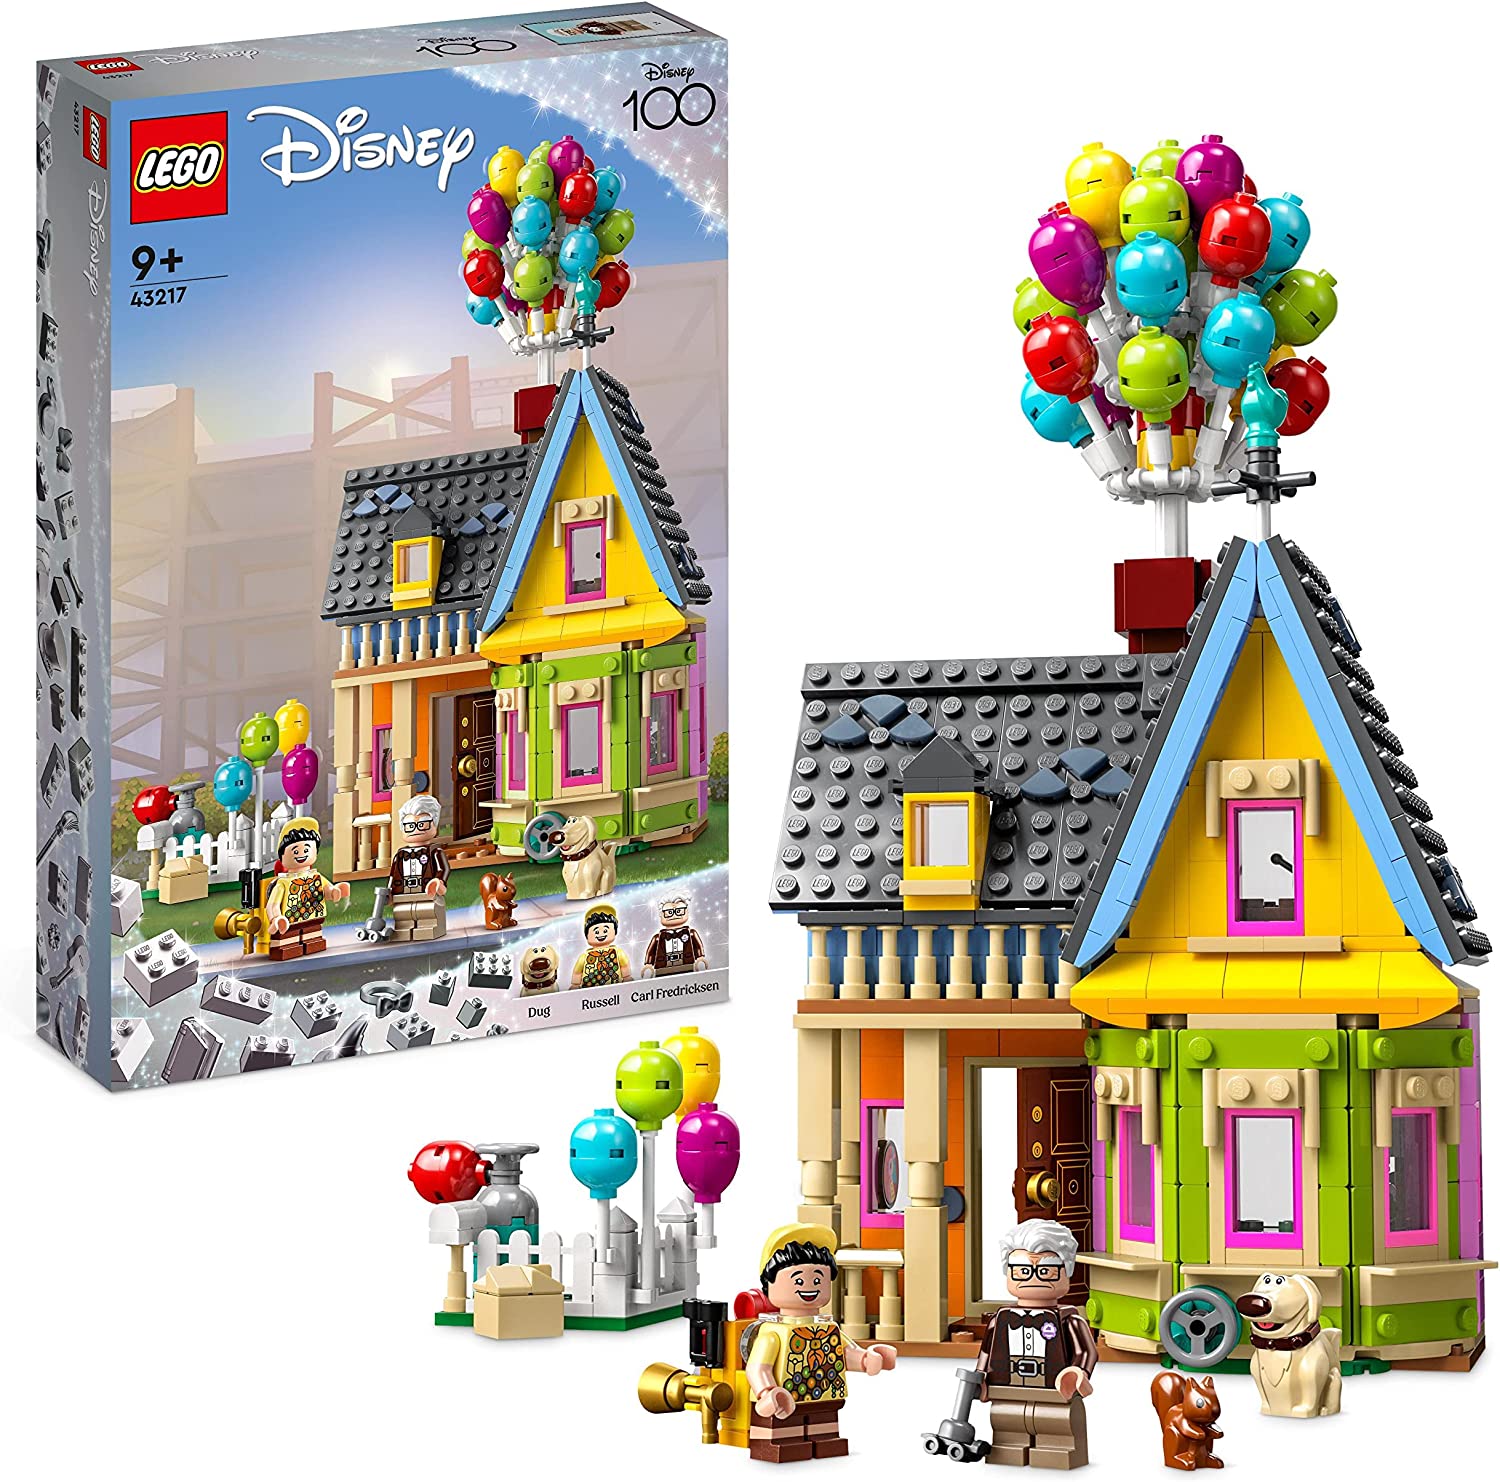 LEGO Disney and Pixar Carl\'s Top House, Buildable Toy with Balloons, Carl, Russell and Dug Figures, 100th Anniversary Set, Iconic Gift Idea 43217